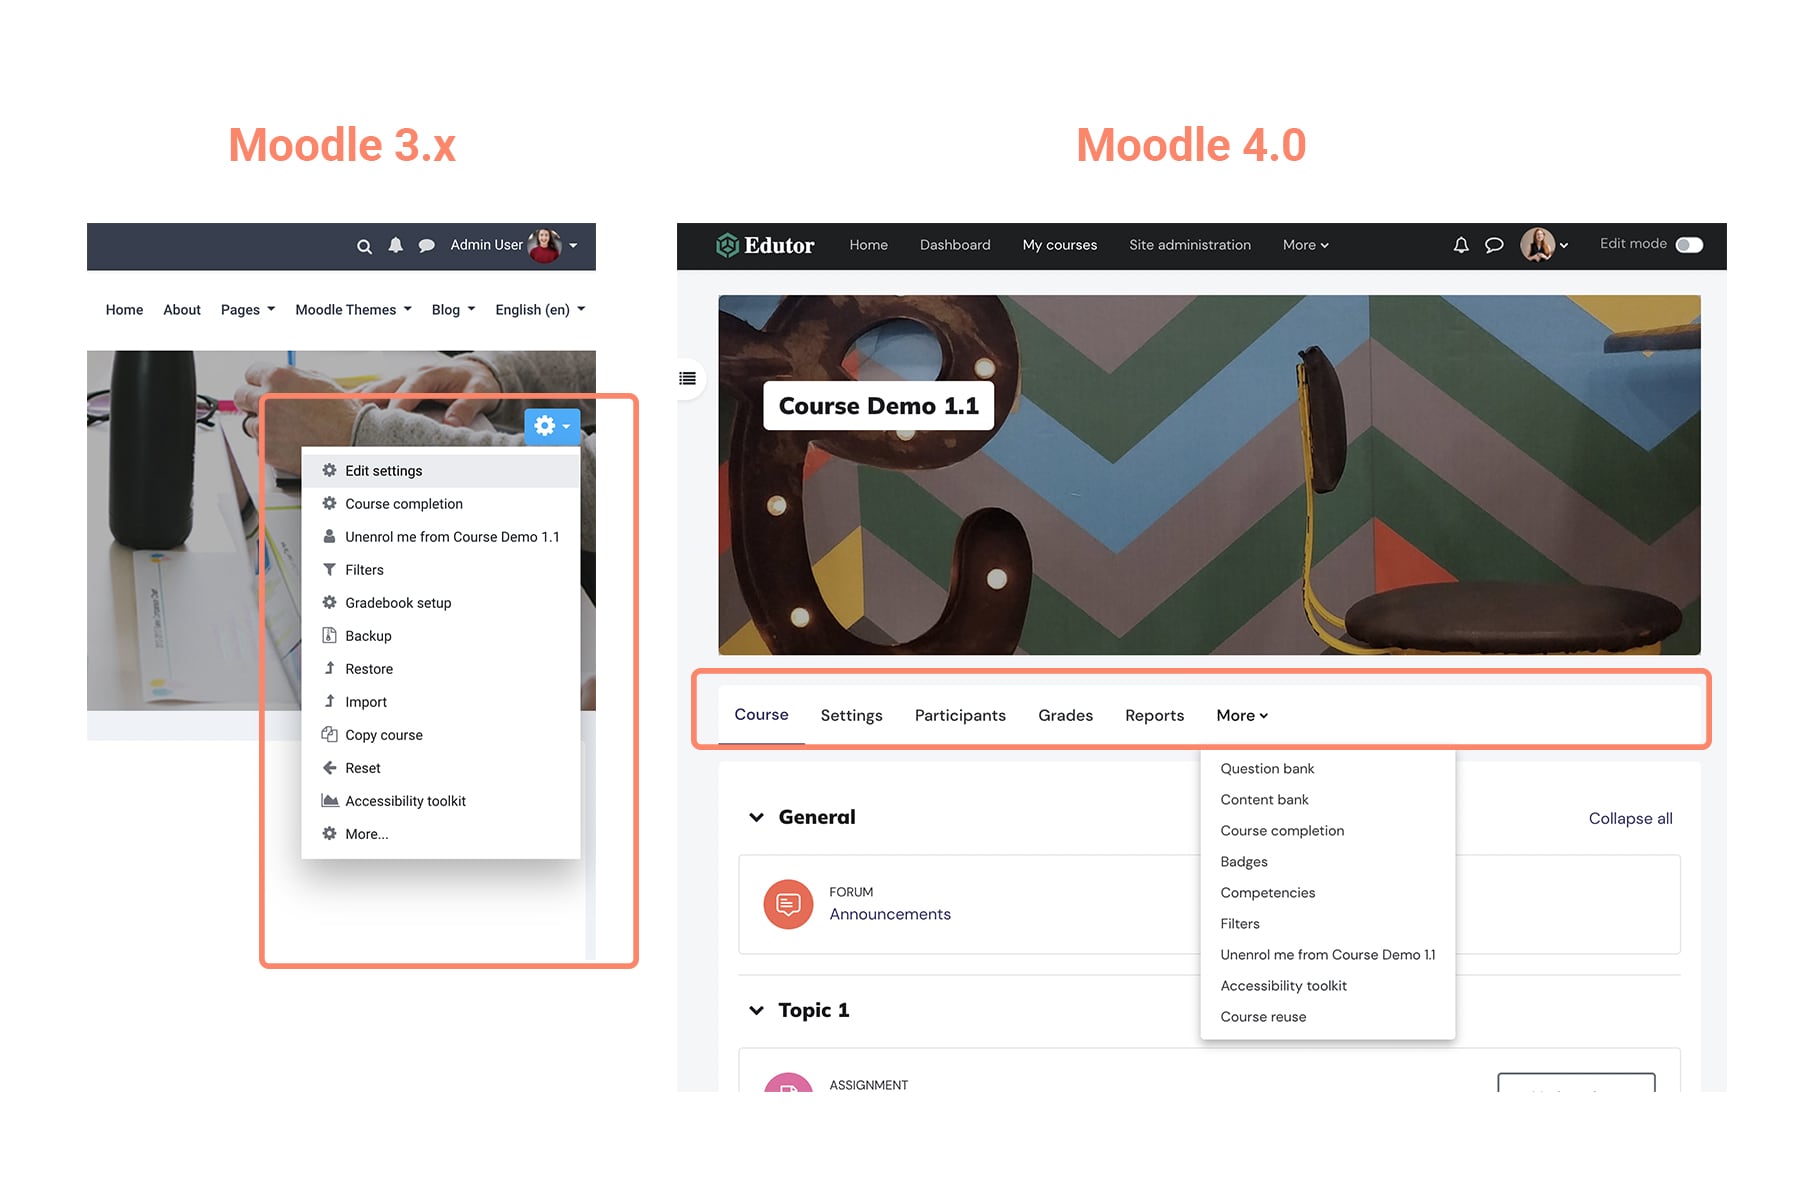 whats-new-in-moodle-4-compare-course-navigation